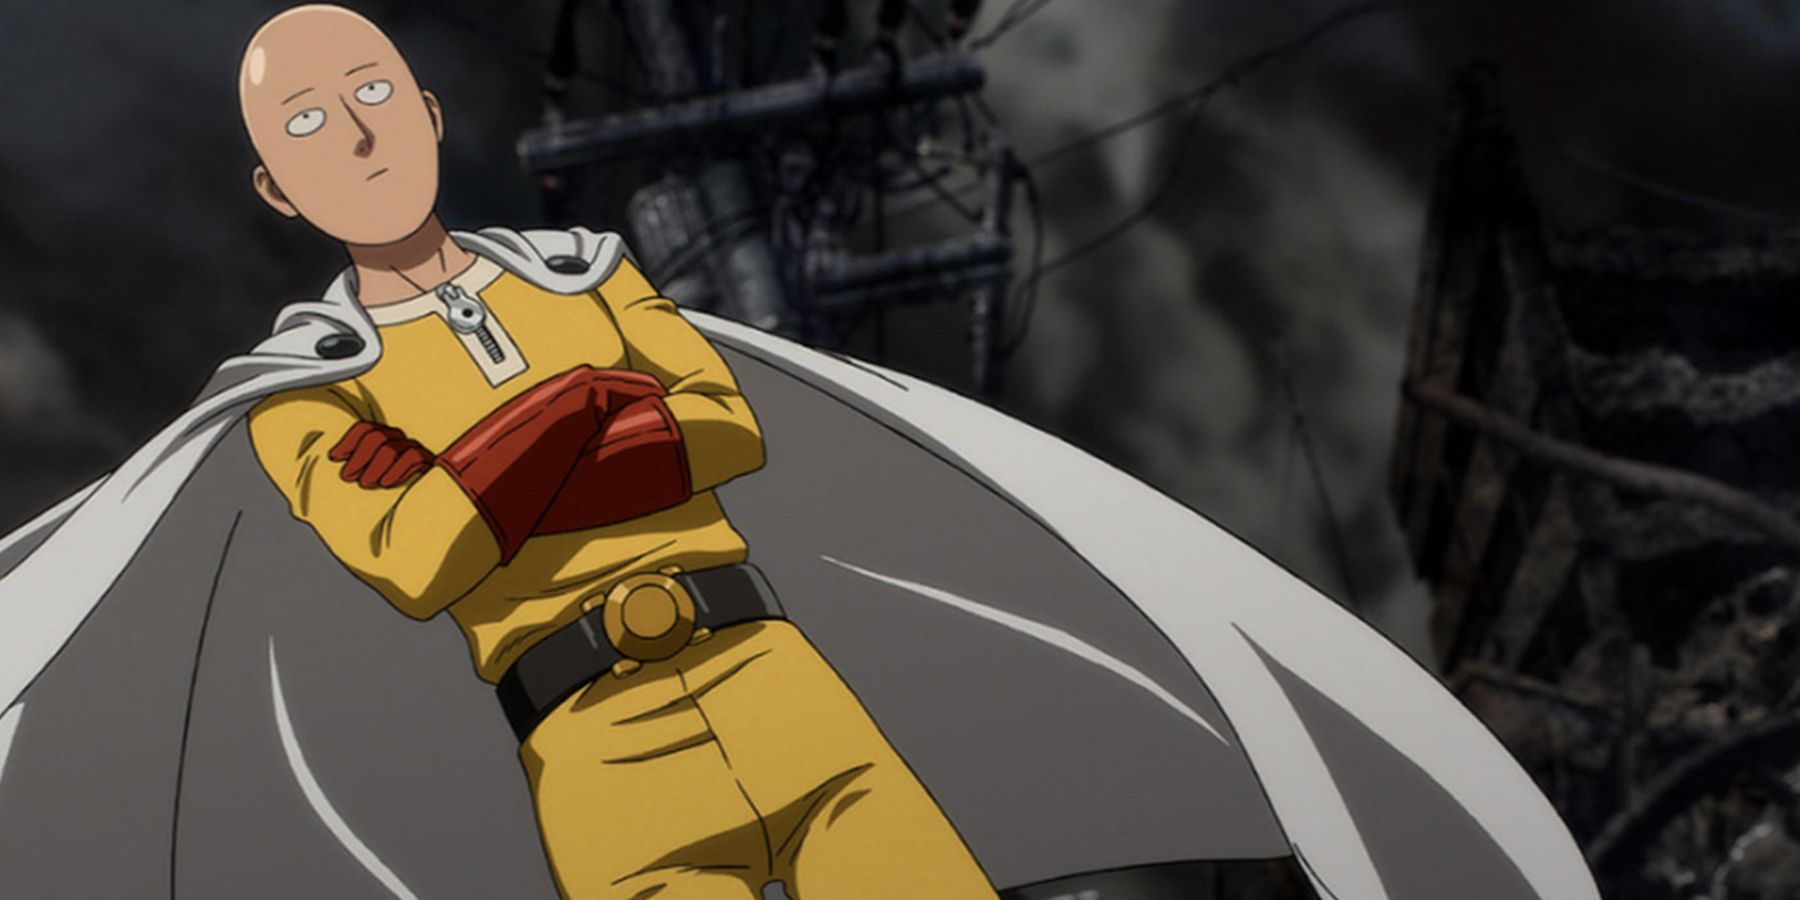 OnePunch Man The Main Characters Ranked From Worst To Best By Character Arc